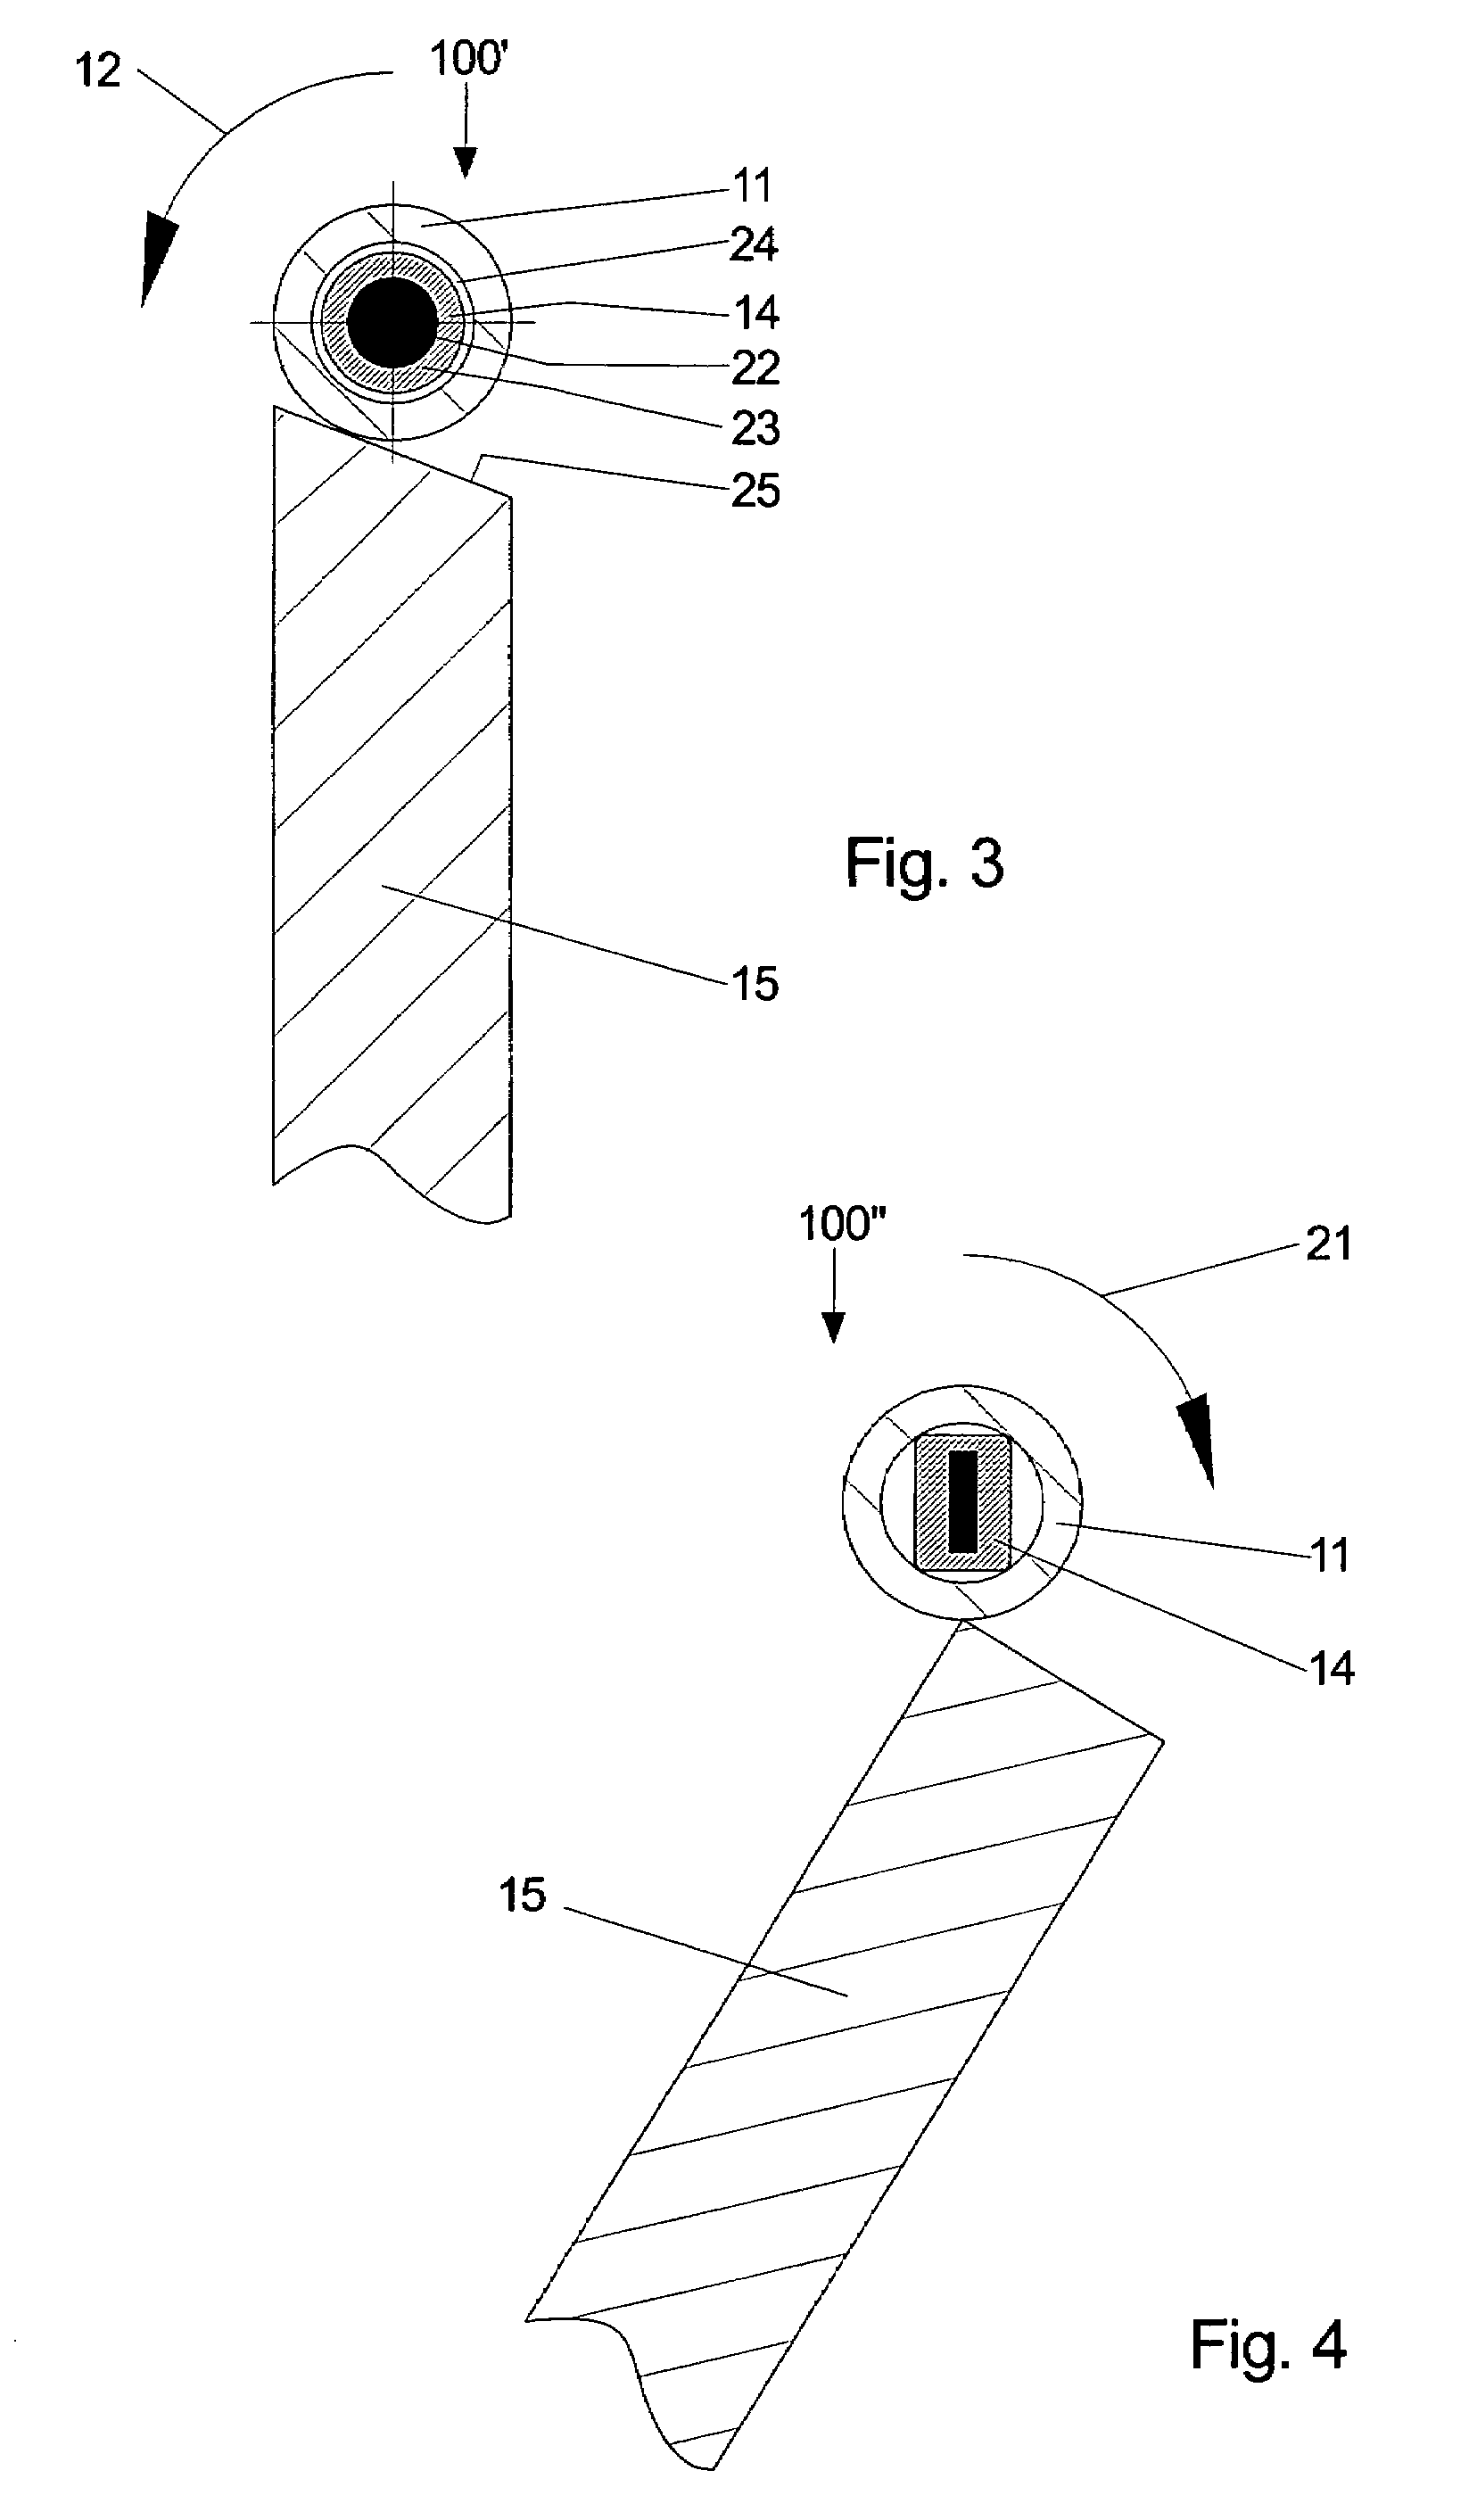 Apparatus for removing molten mass from confectionaries